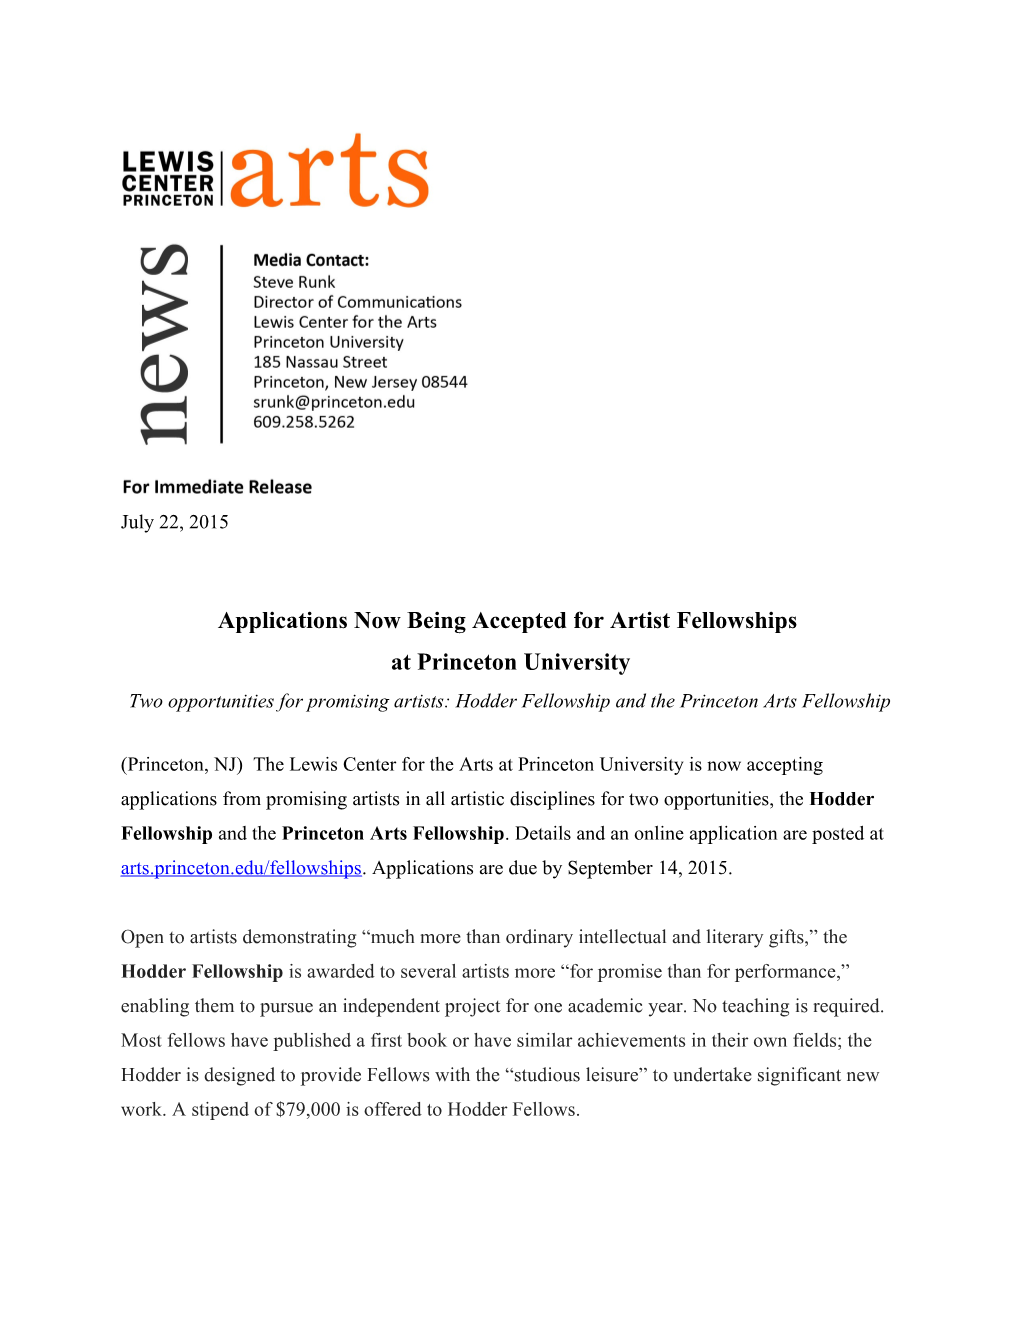 Applications Now Being Accepted for Artistfellowships